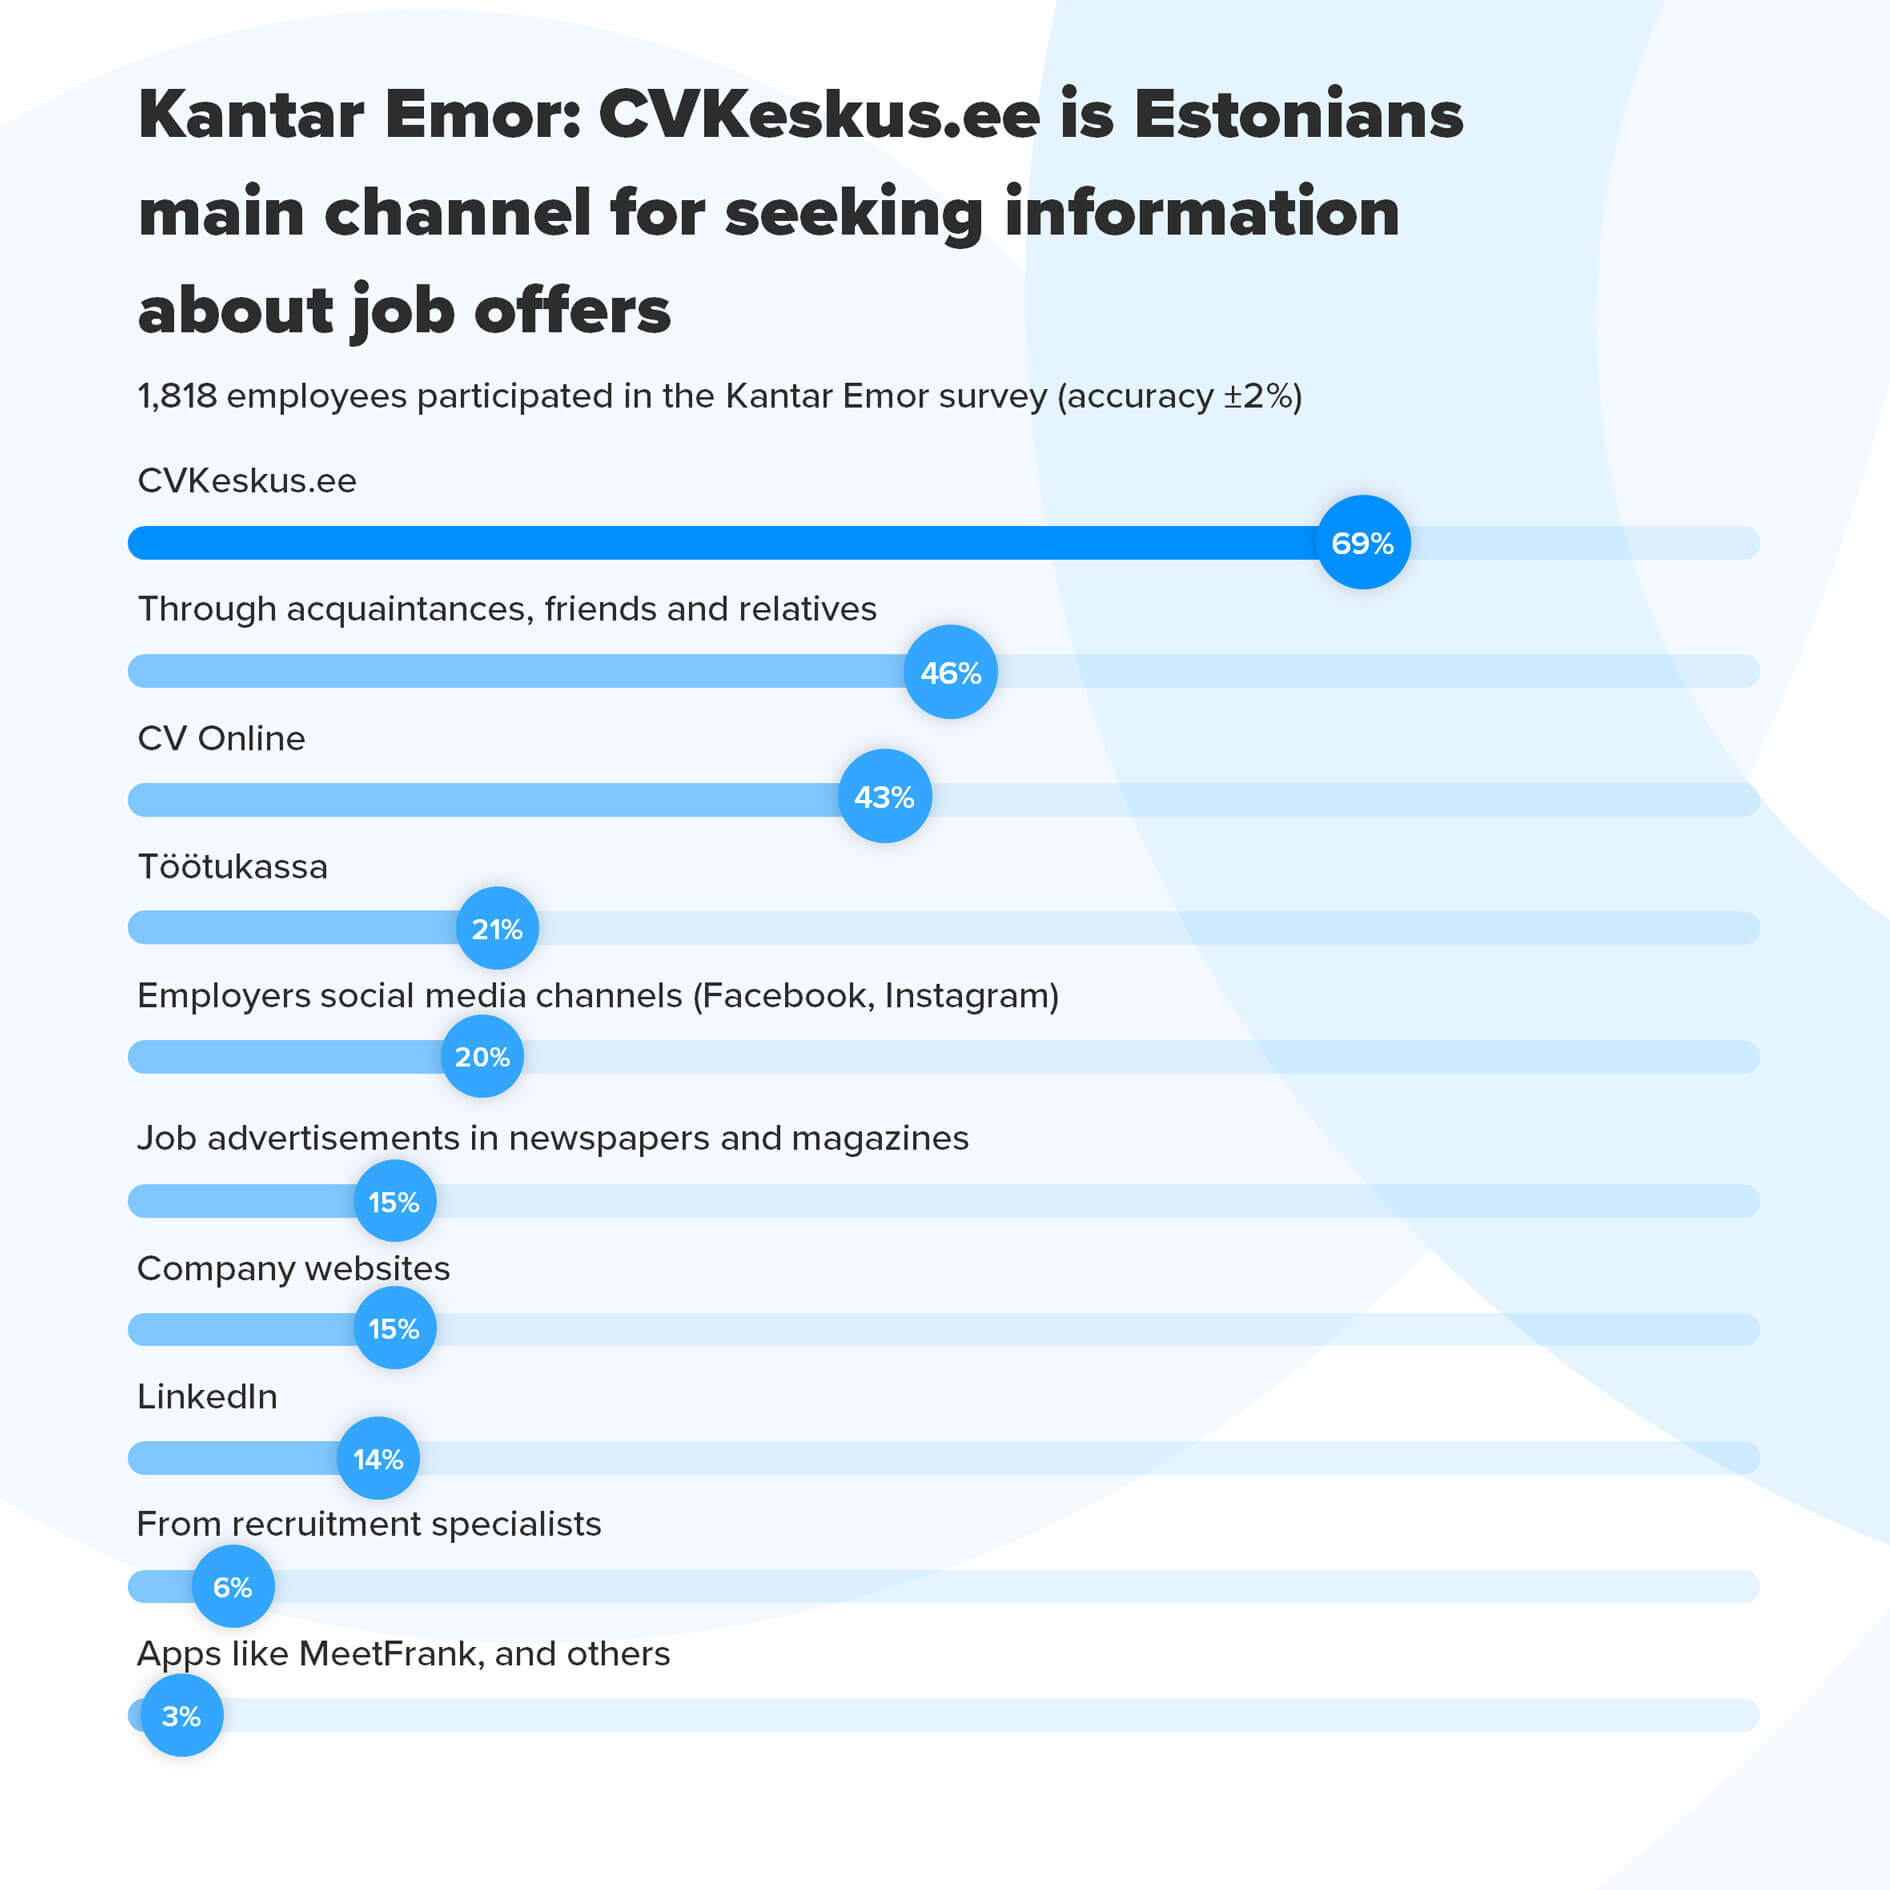 Kantar Emor survey revealed the most preferred job search channels of employees